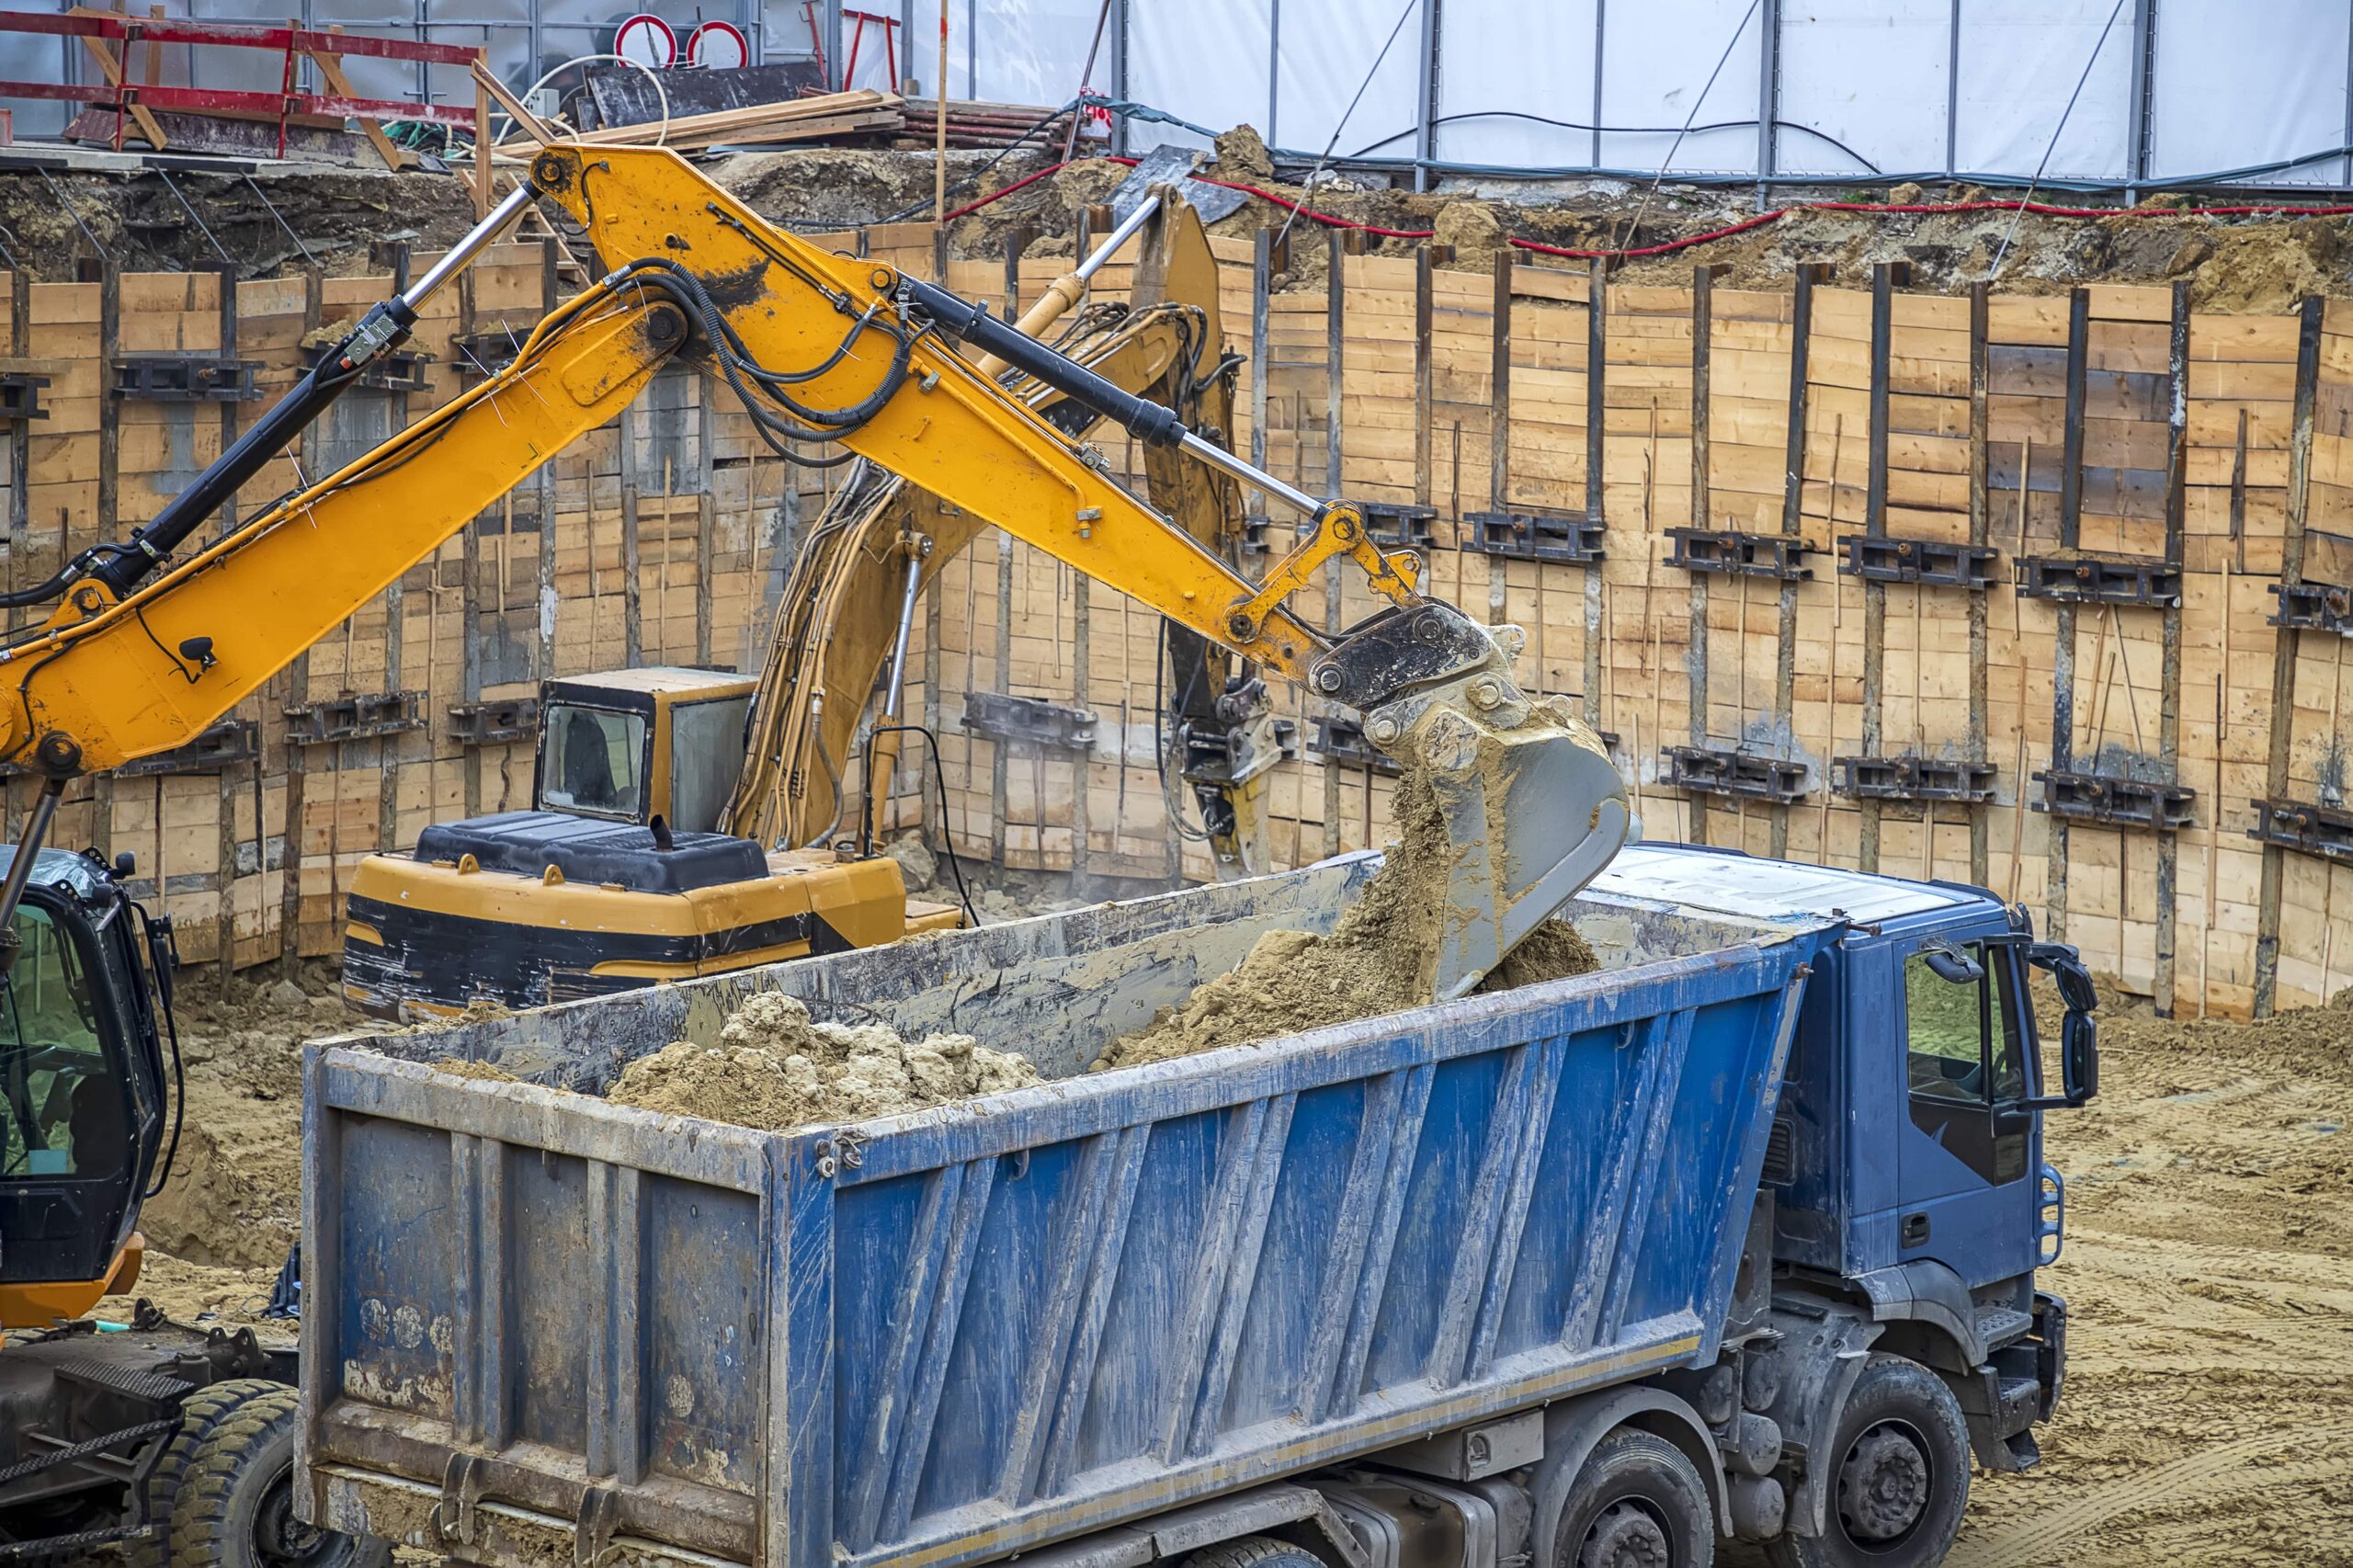 Excavator Hire with large excavation equipment from Stronger Foundations